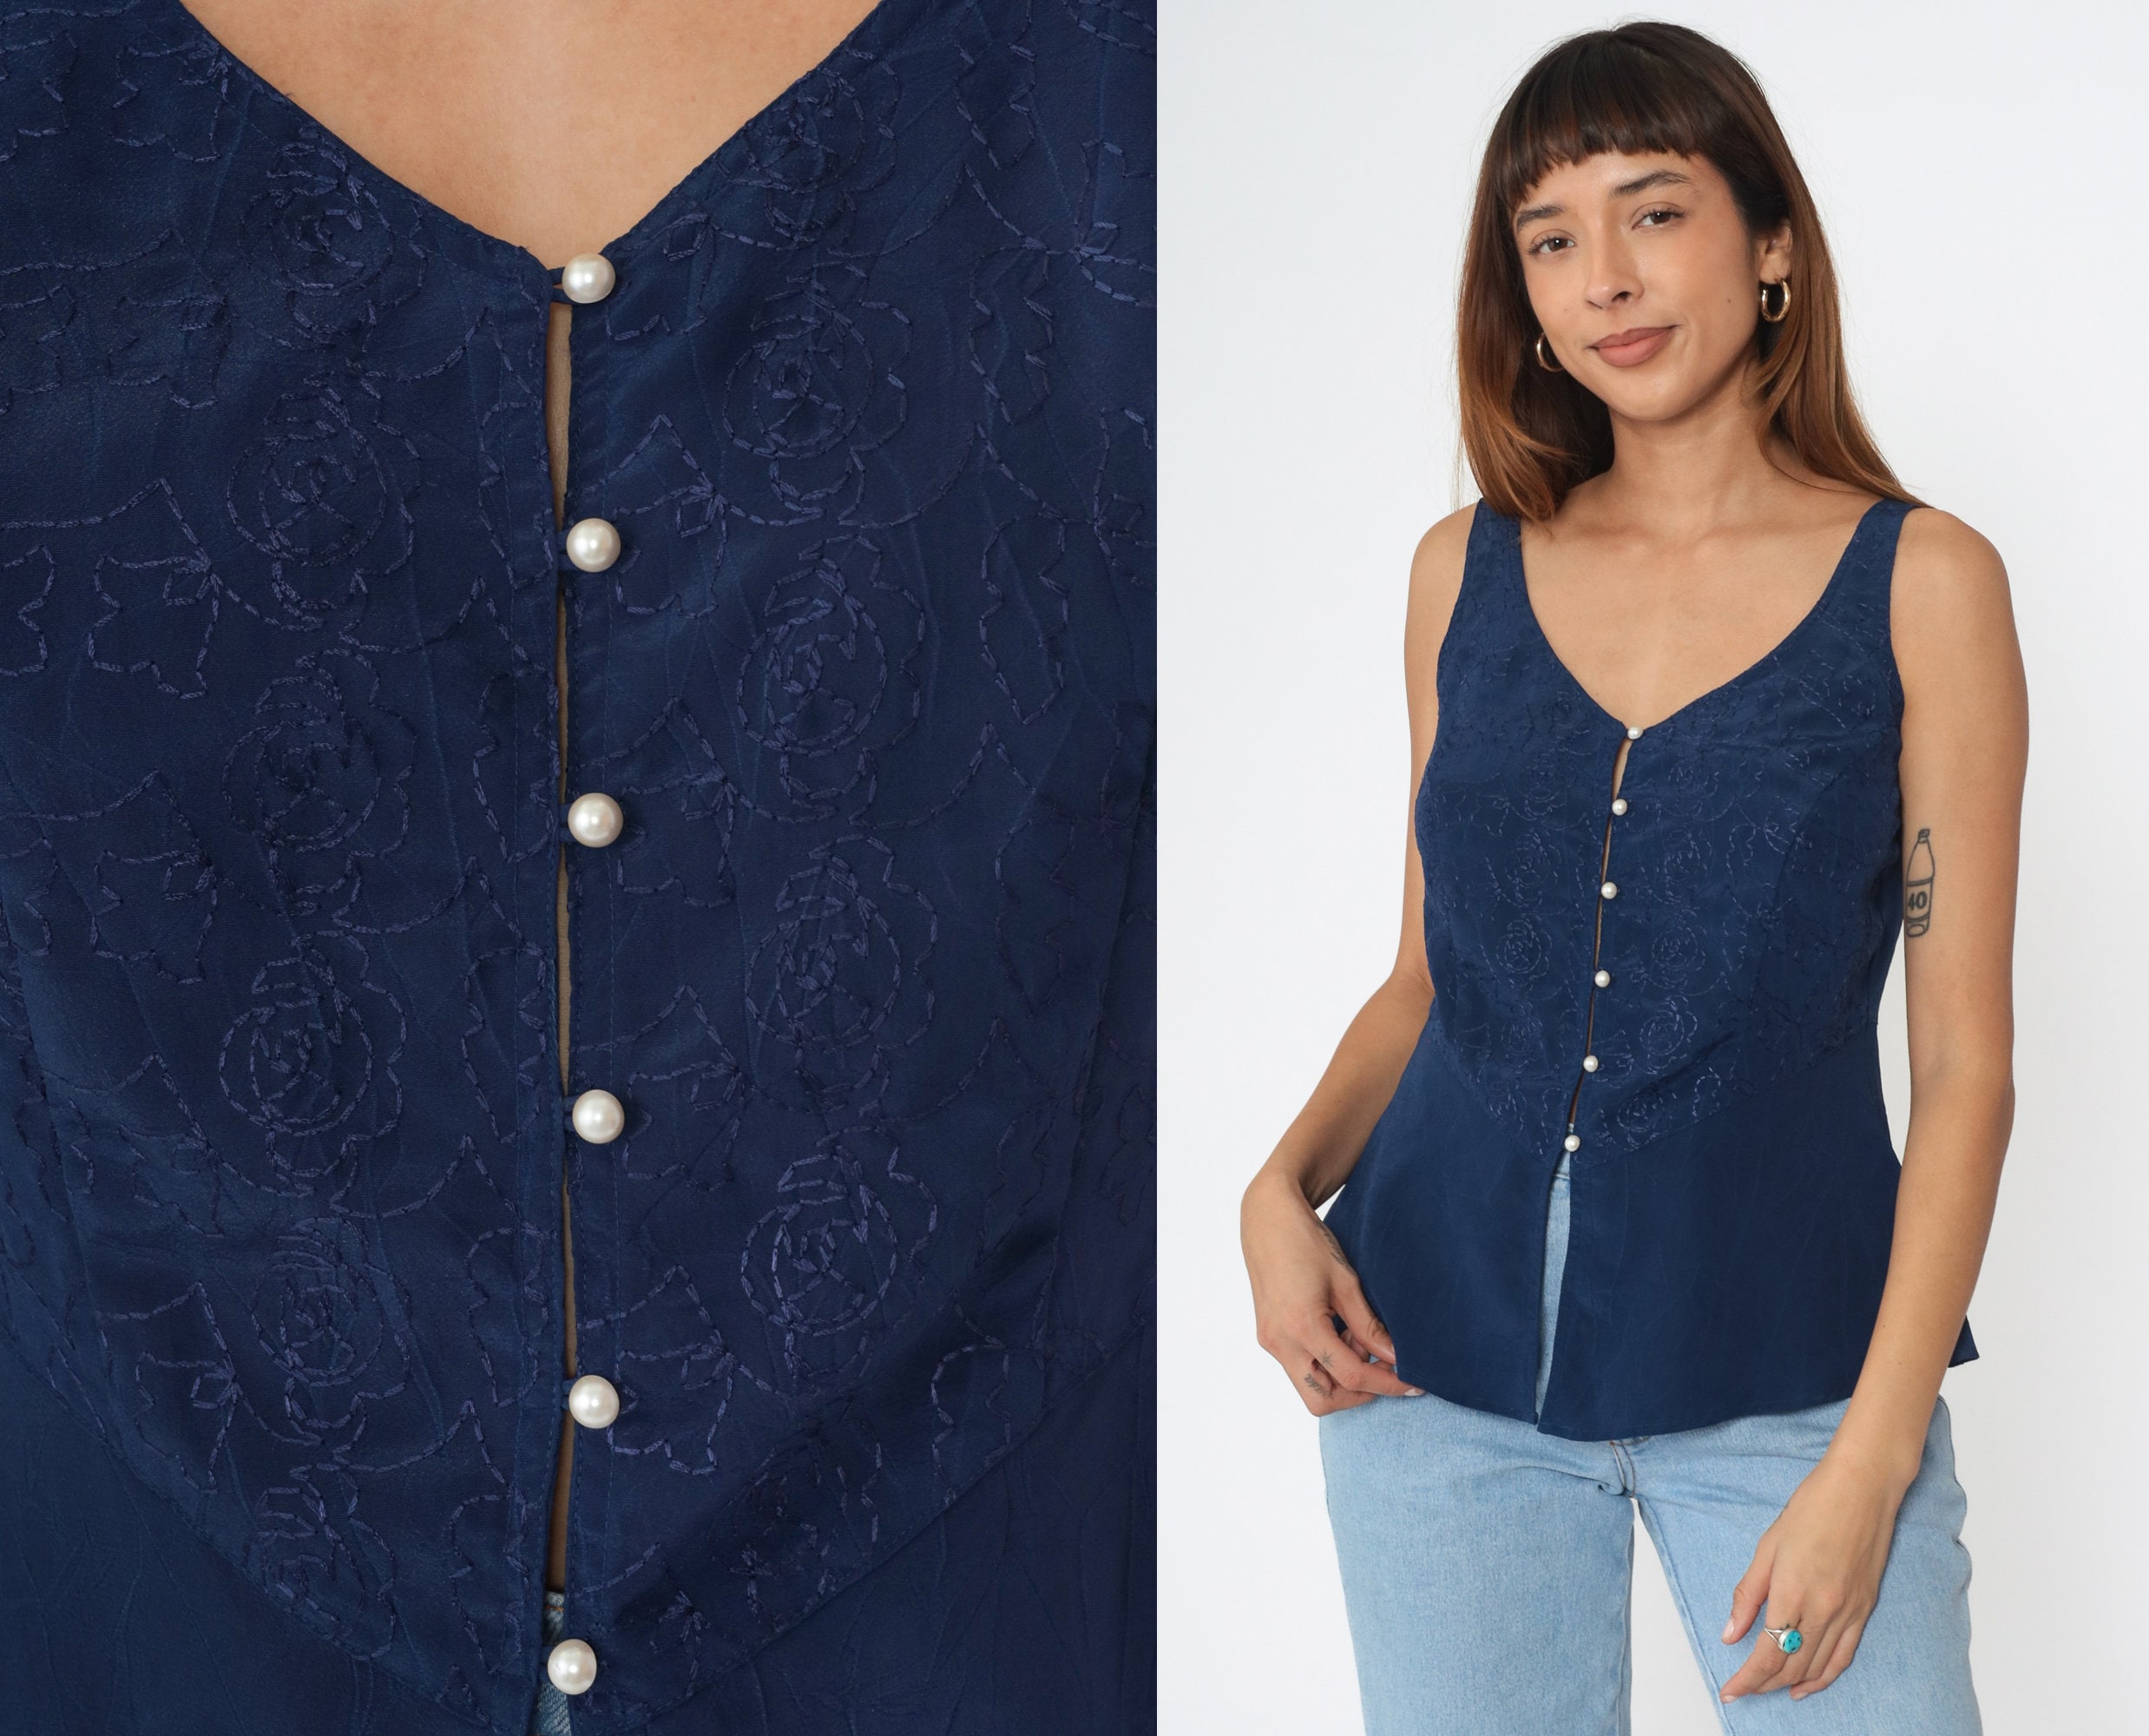 Victoria's Secret Tank Top 90s Floral Embroidered Shirt Navy Blue